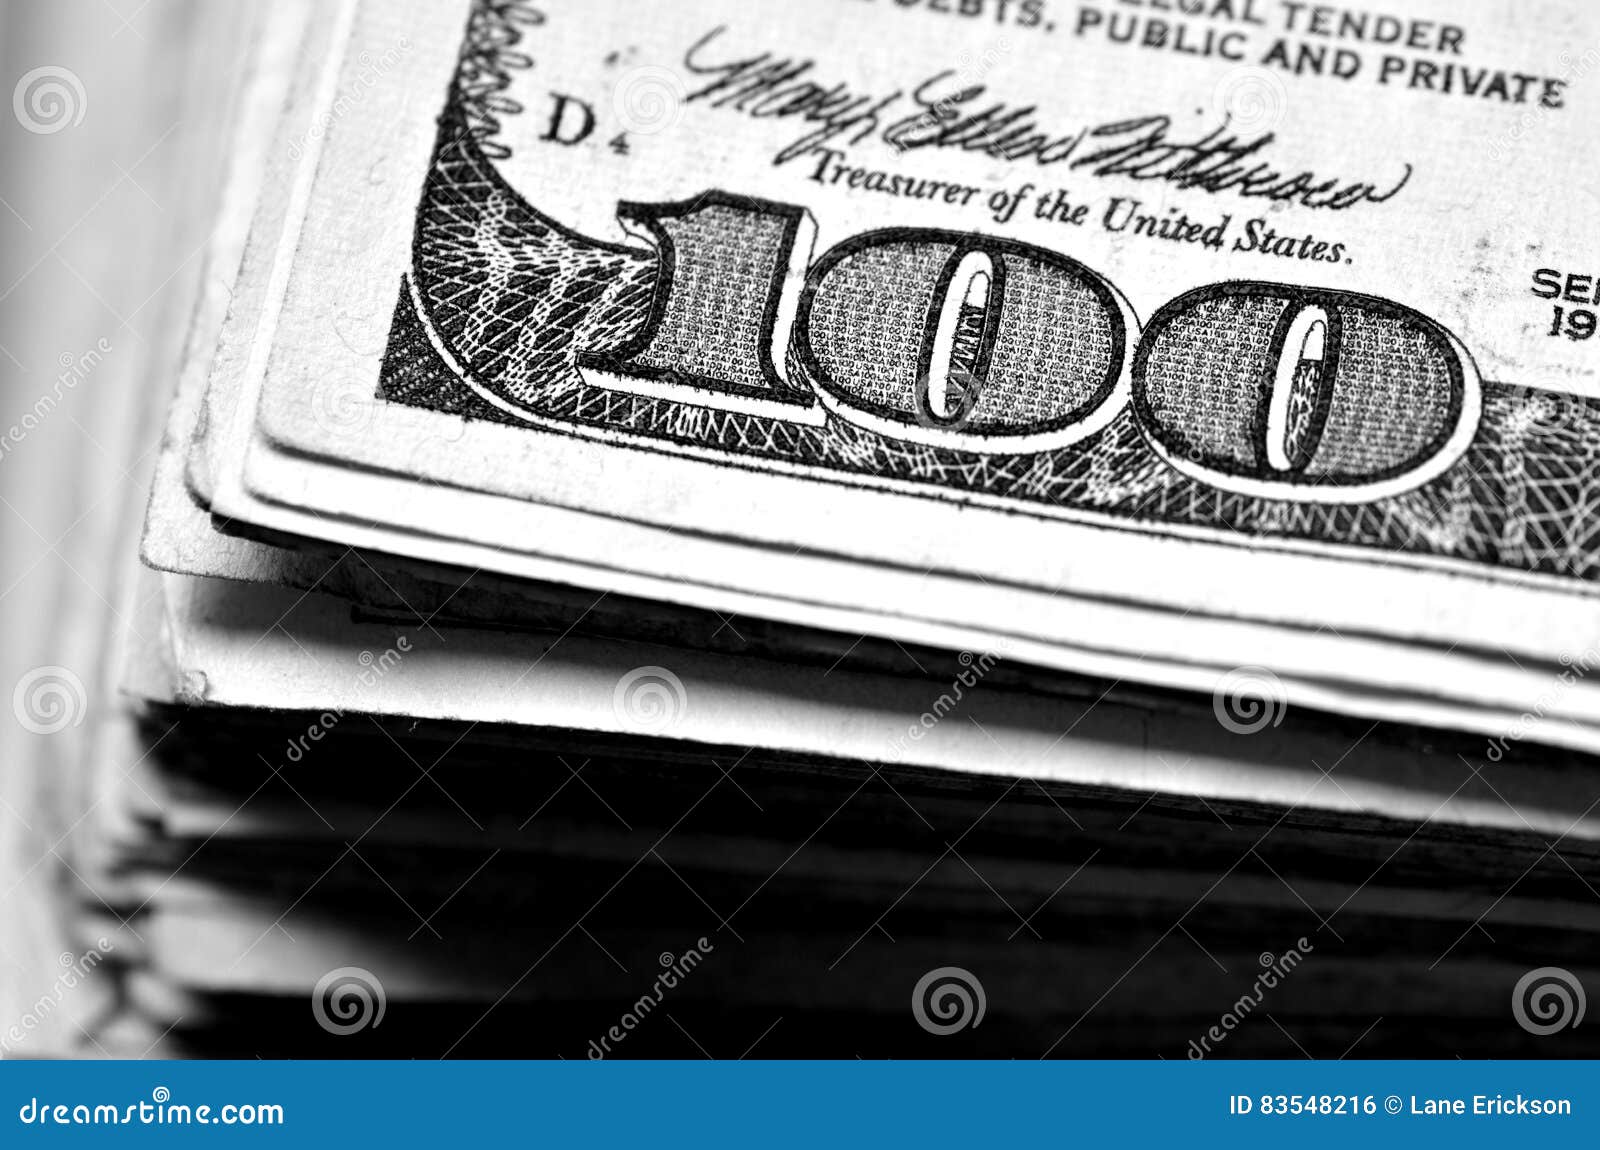 american dollars currency representing wealth and riches